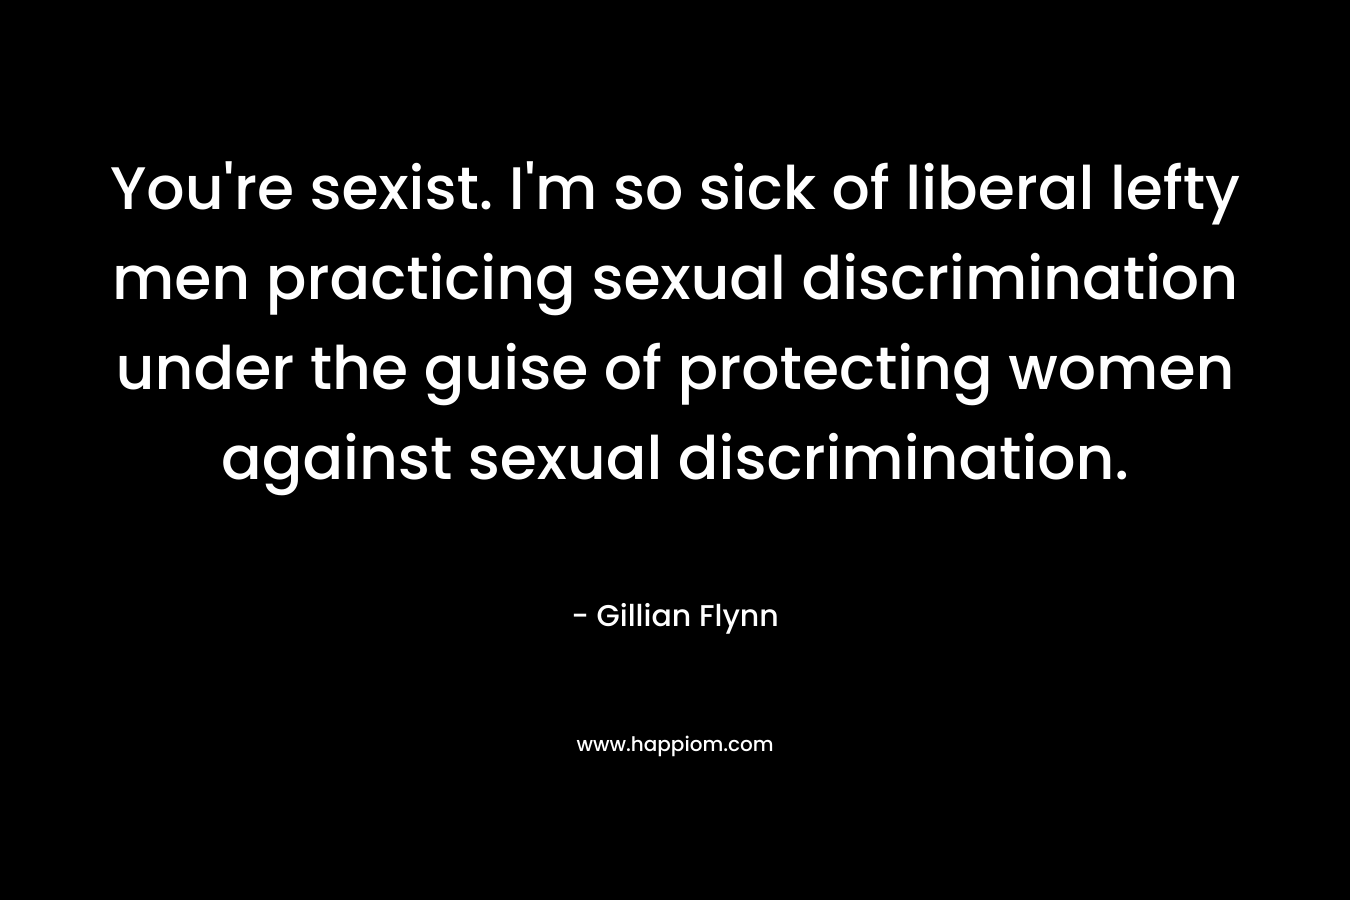 You're sexist. I'm so sick of liberal lefty men practicing sexual discrimination under the guise of protecting women against sexual discrimination.